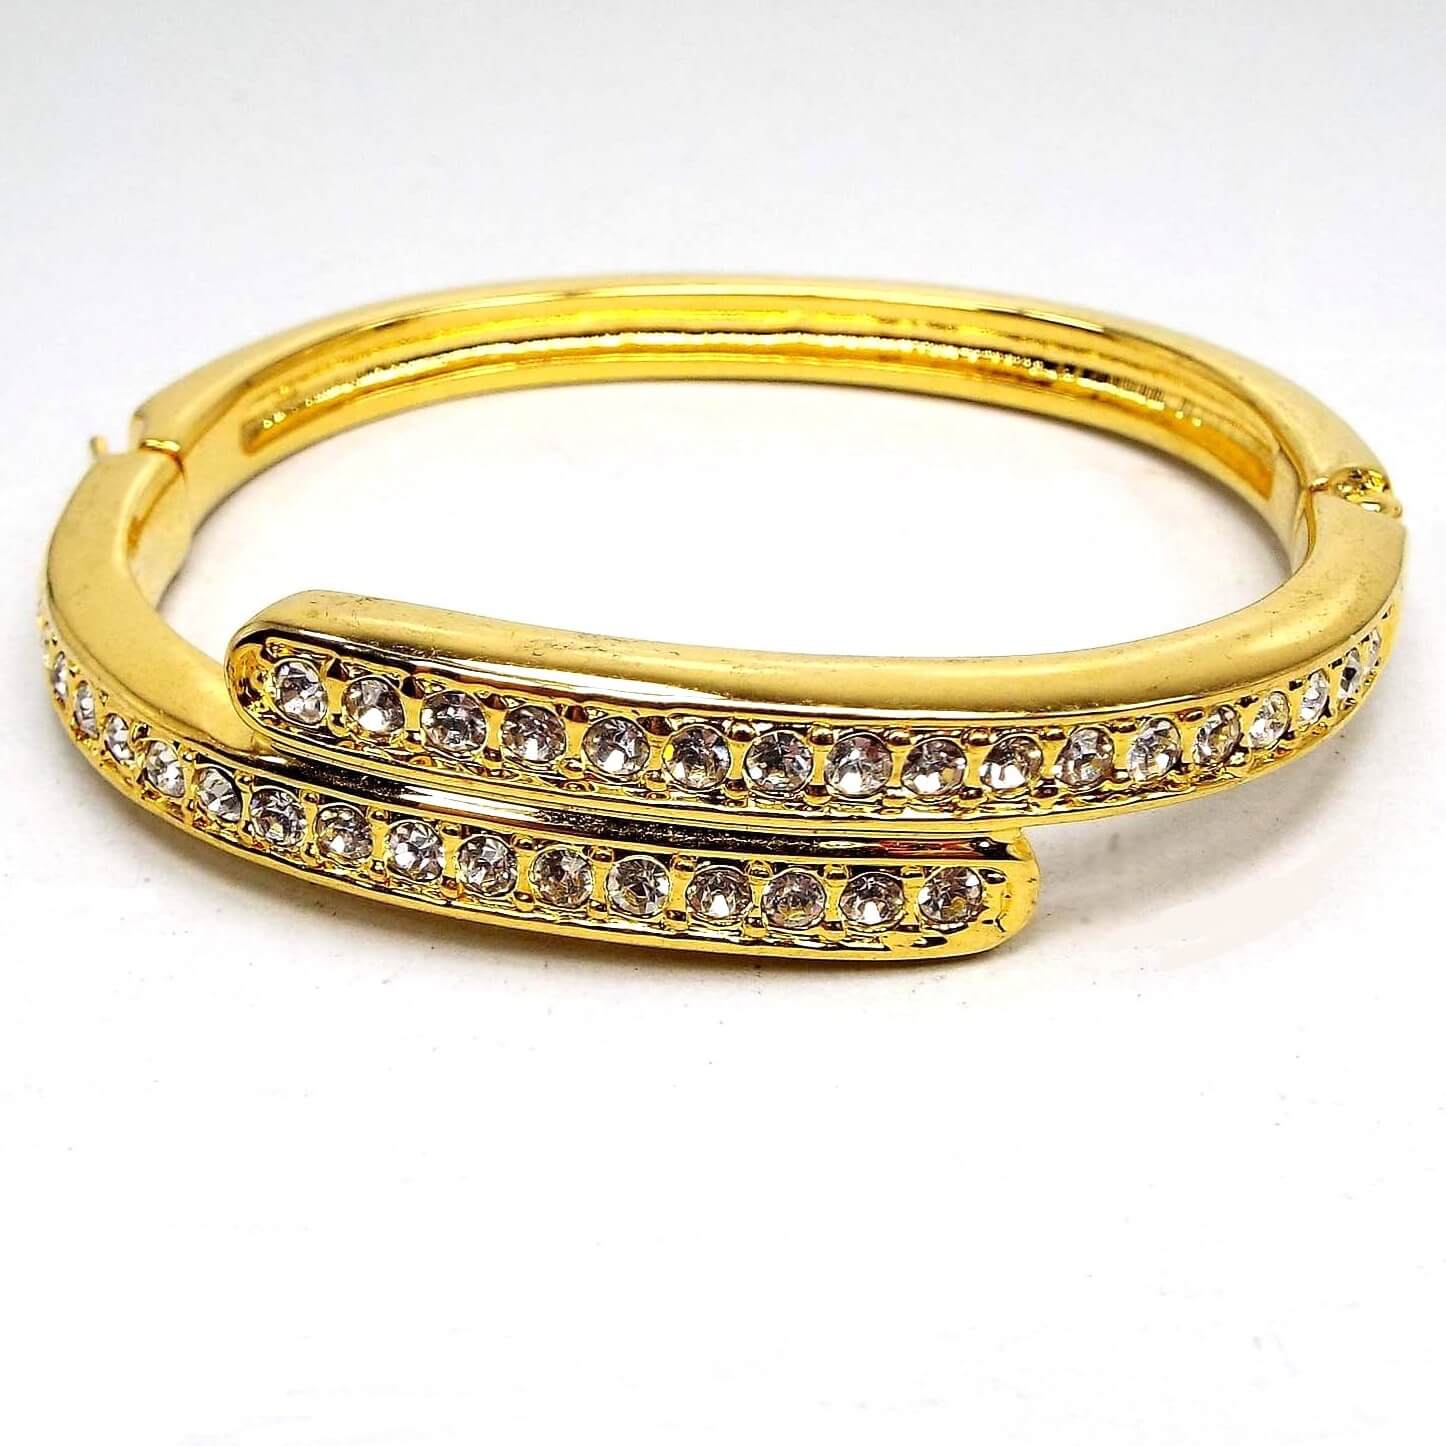 Front view of the retro vintage rhinestone bangle bracelet. It is gold tone in color. The top part has two curved bar areas that have a bypass style design. Each has a row of round clear rhinestones on it. The bottom of the bangle is plain metal.